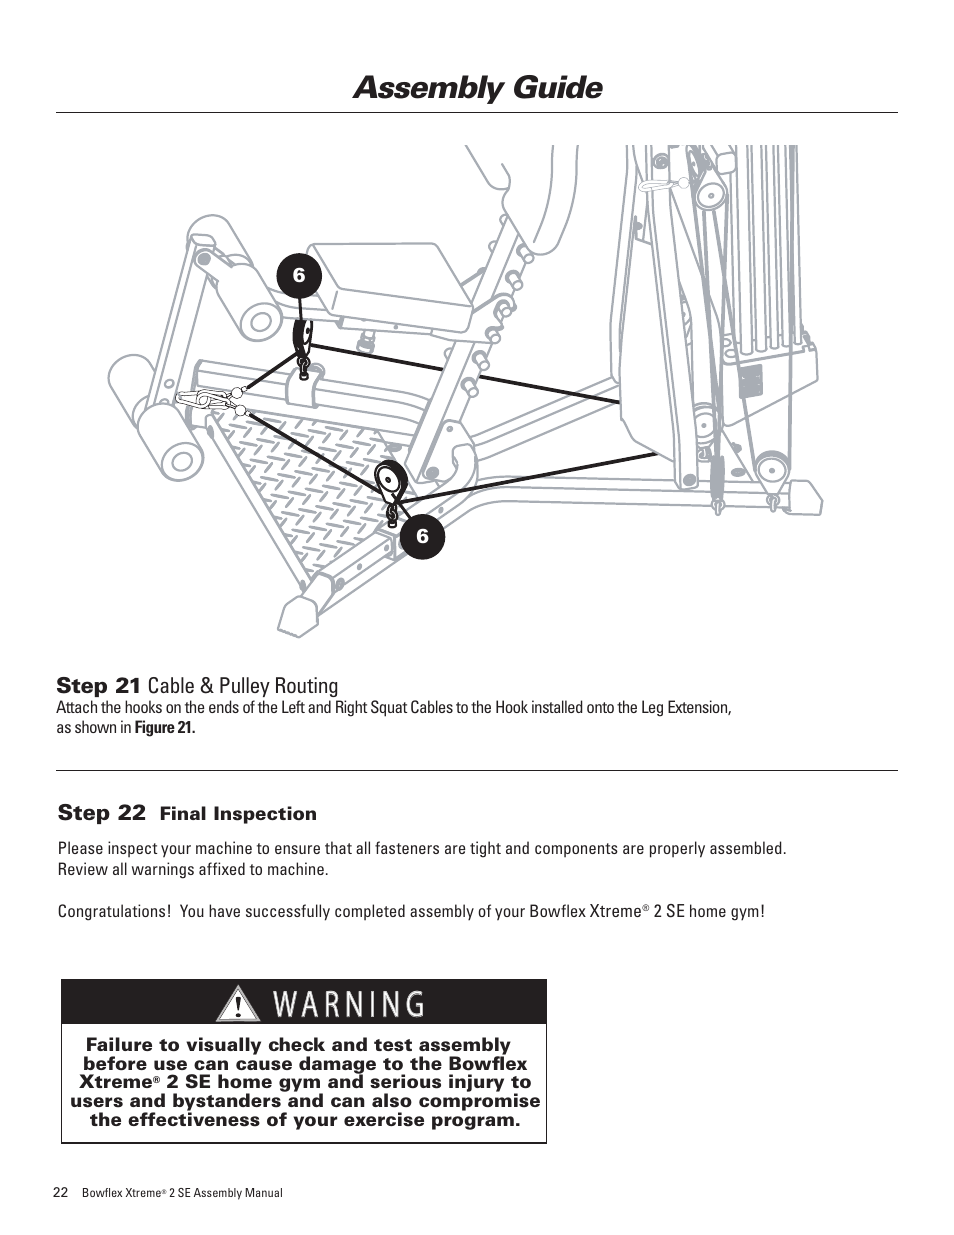 Assembly guide, Immediate action required | Bowflex Xtreme 2 SE User ...